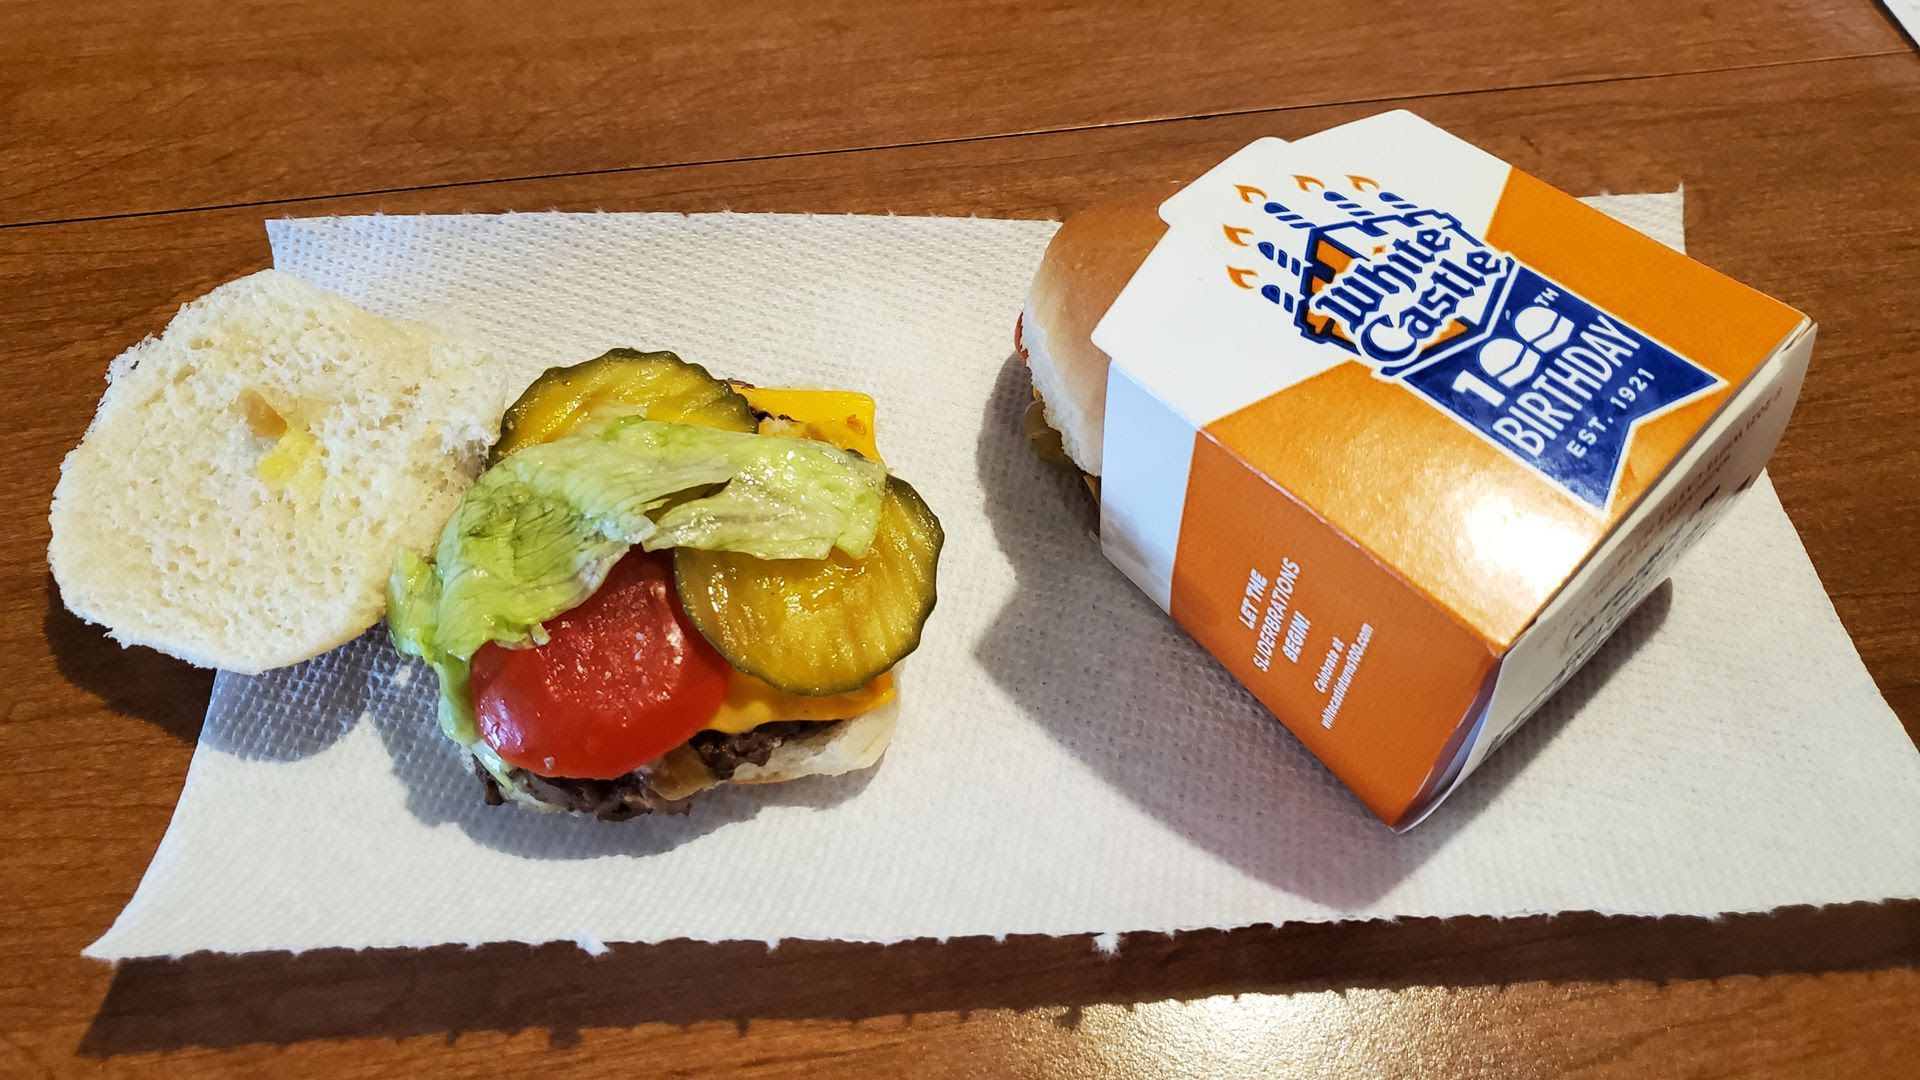 A look at the 1921 Sliders from White Castle. 